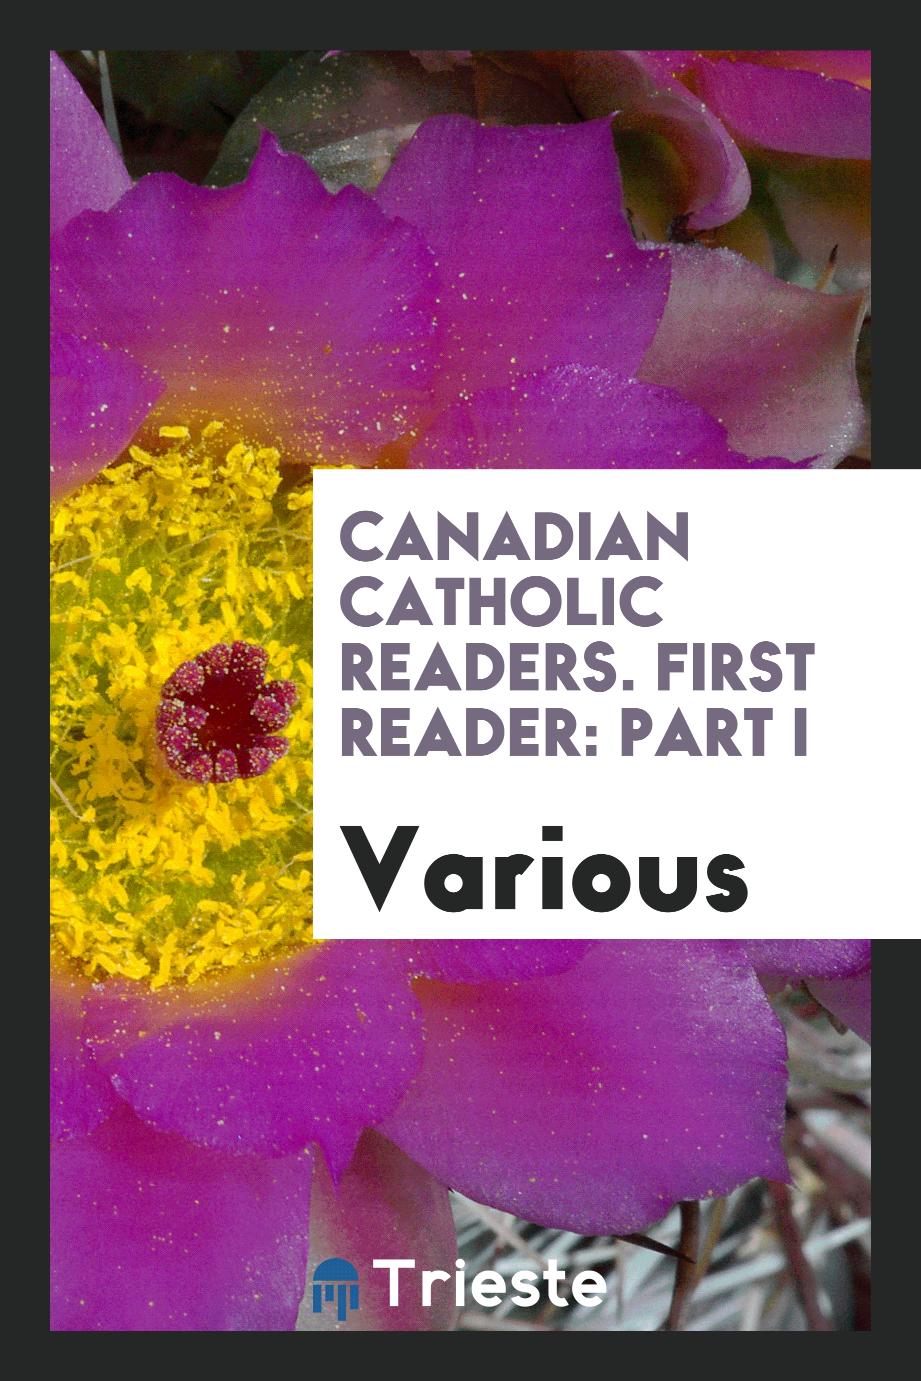 Canadian Catholic readers. First reader: part I